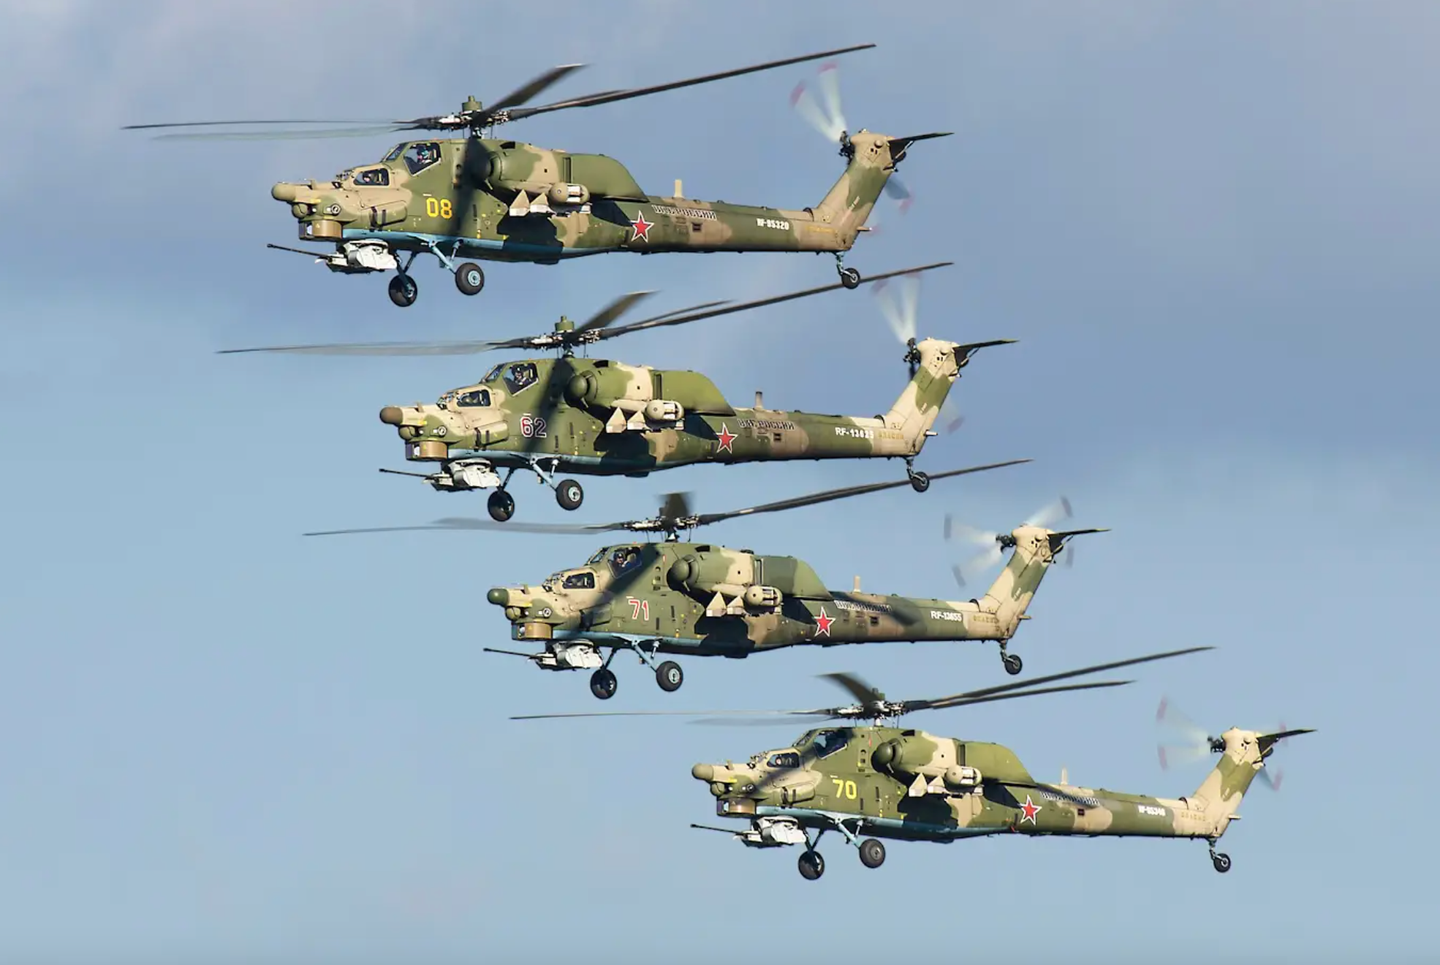 Mi-28N helicopters from the 344th State Combat Training and Flight Crew Conversion Center in Torzhok.&nbsp;<em>Andrei Shmatko/Wikimedia Commons</em>